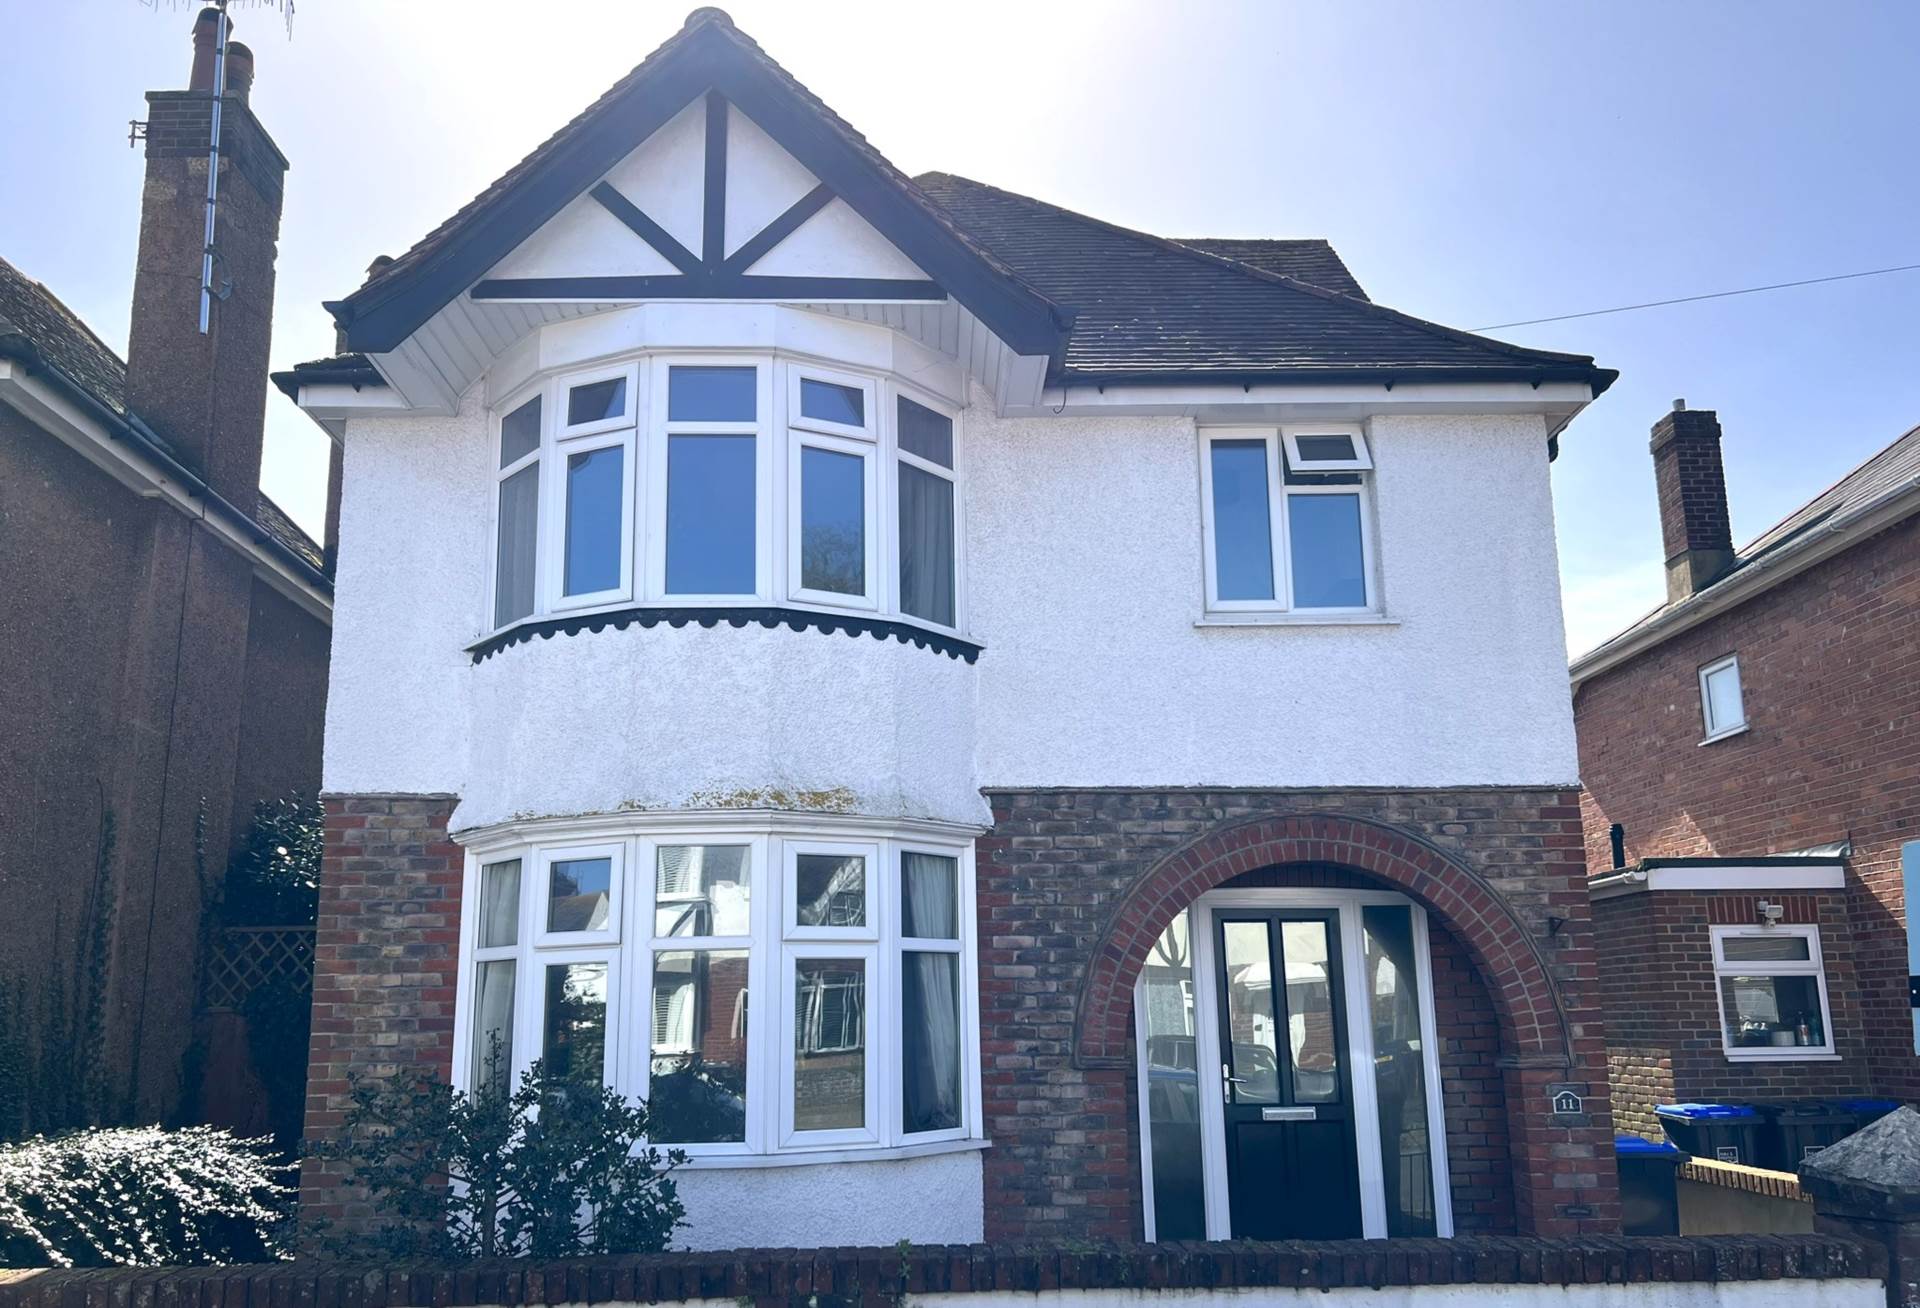 4 bed Detached House for rent in Worthing. From Matthew Anthony Estate Agency